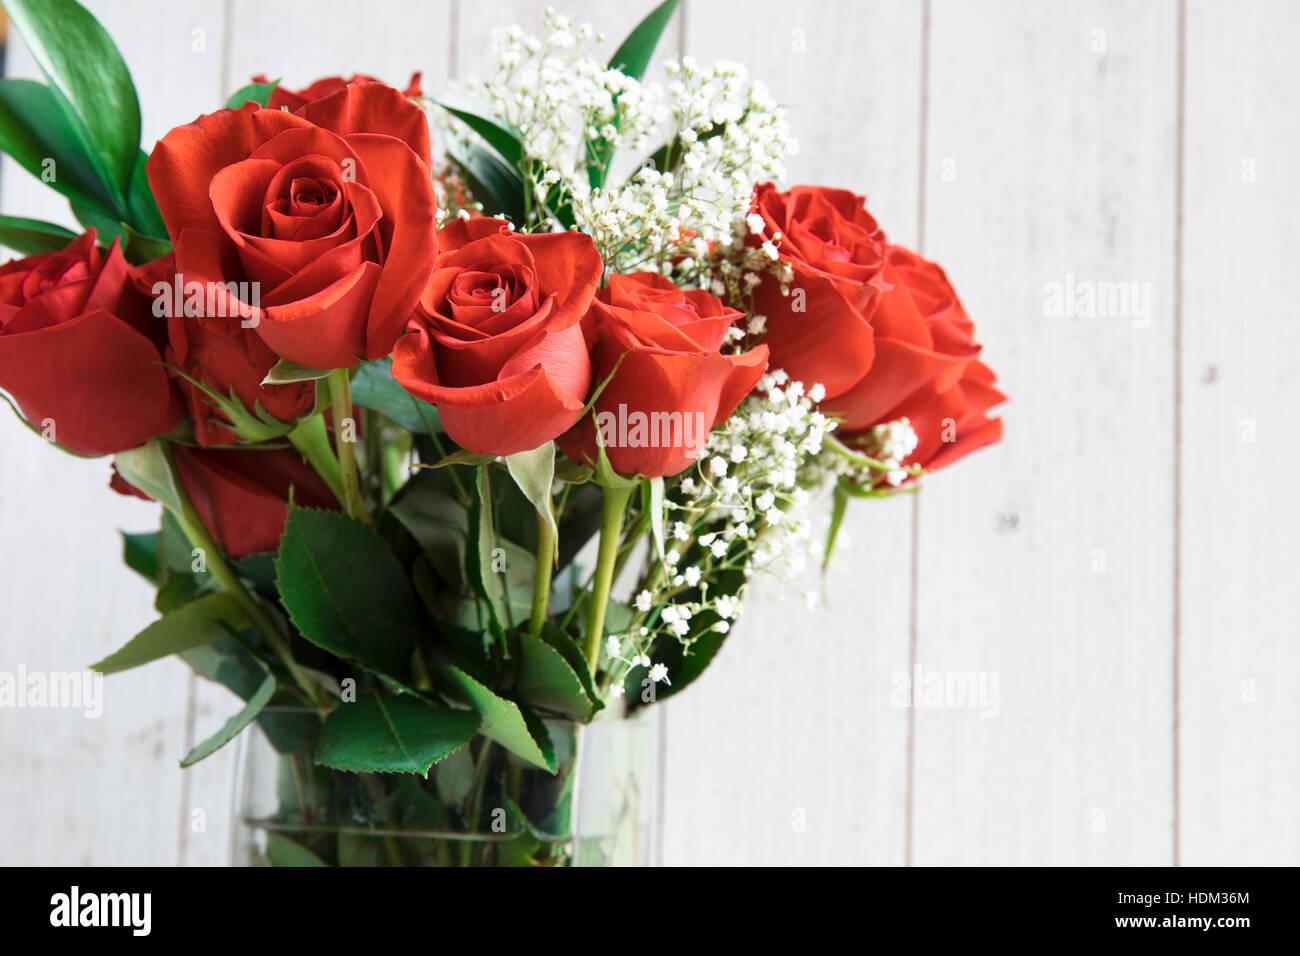 Romantic red rose bouquet for a special occasions with copy space. Stock Photo